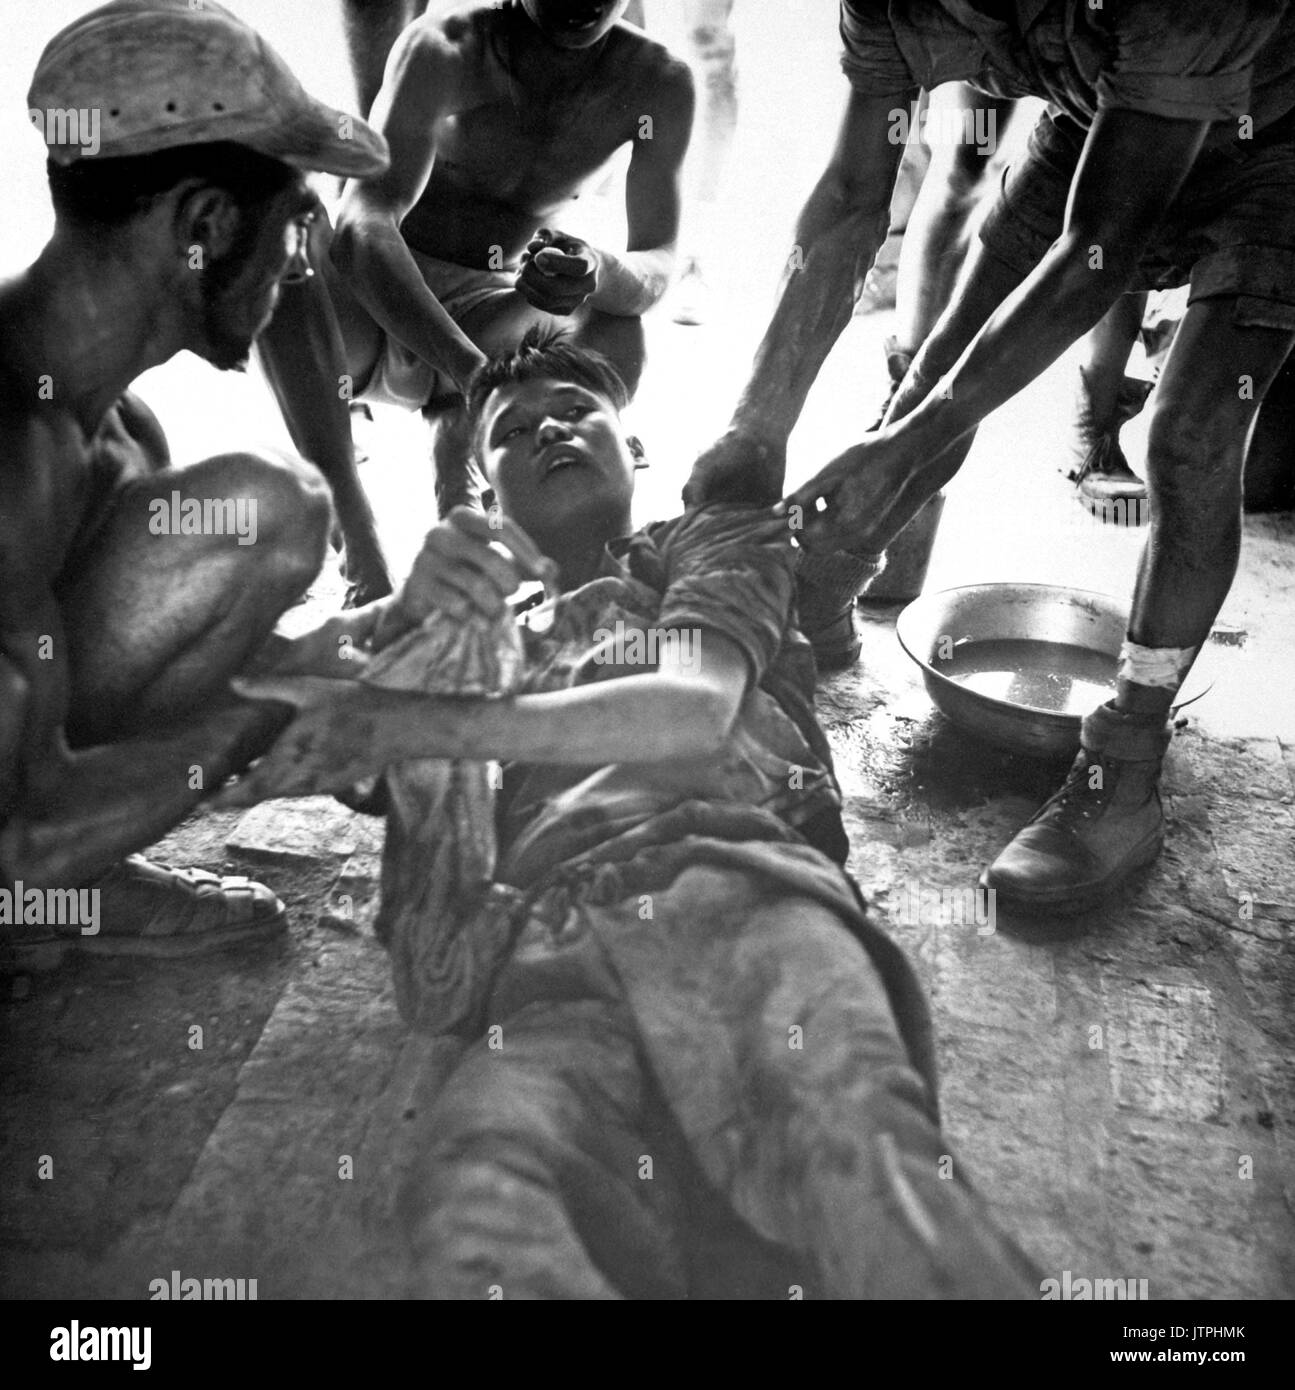 A wounded Vietminh prisoner is given first aid by Franco Vietnamese medicals after hot fire fight near Hung Yen, south of Hanoi.  Ca.  1954  (USIA) EXACT DATE SHOT UNKNOWN NARA FILE #:  306-PS-54-11793 WAR & CONFLICT BOOK #:  384 Stock Photo